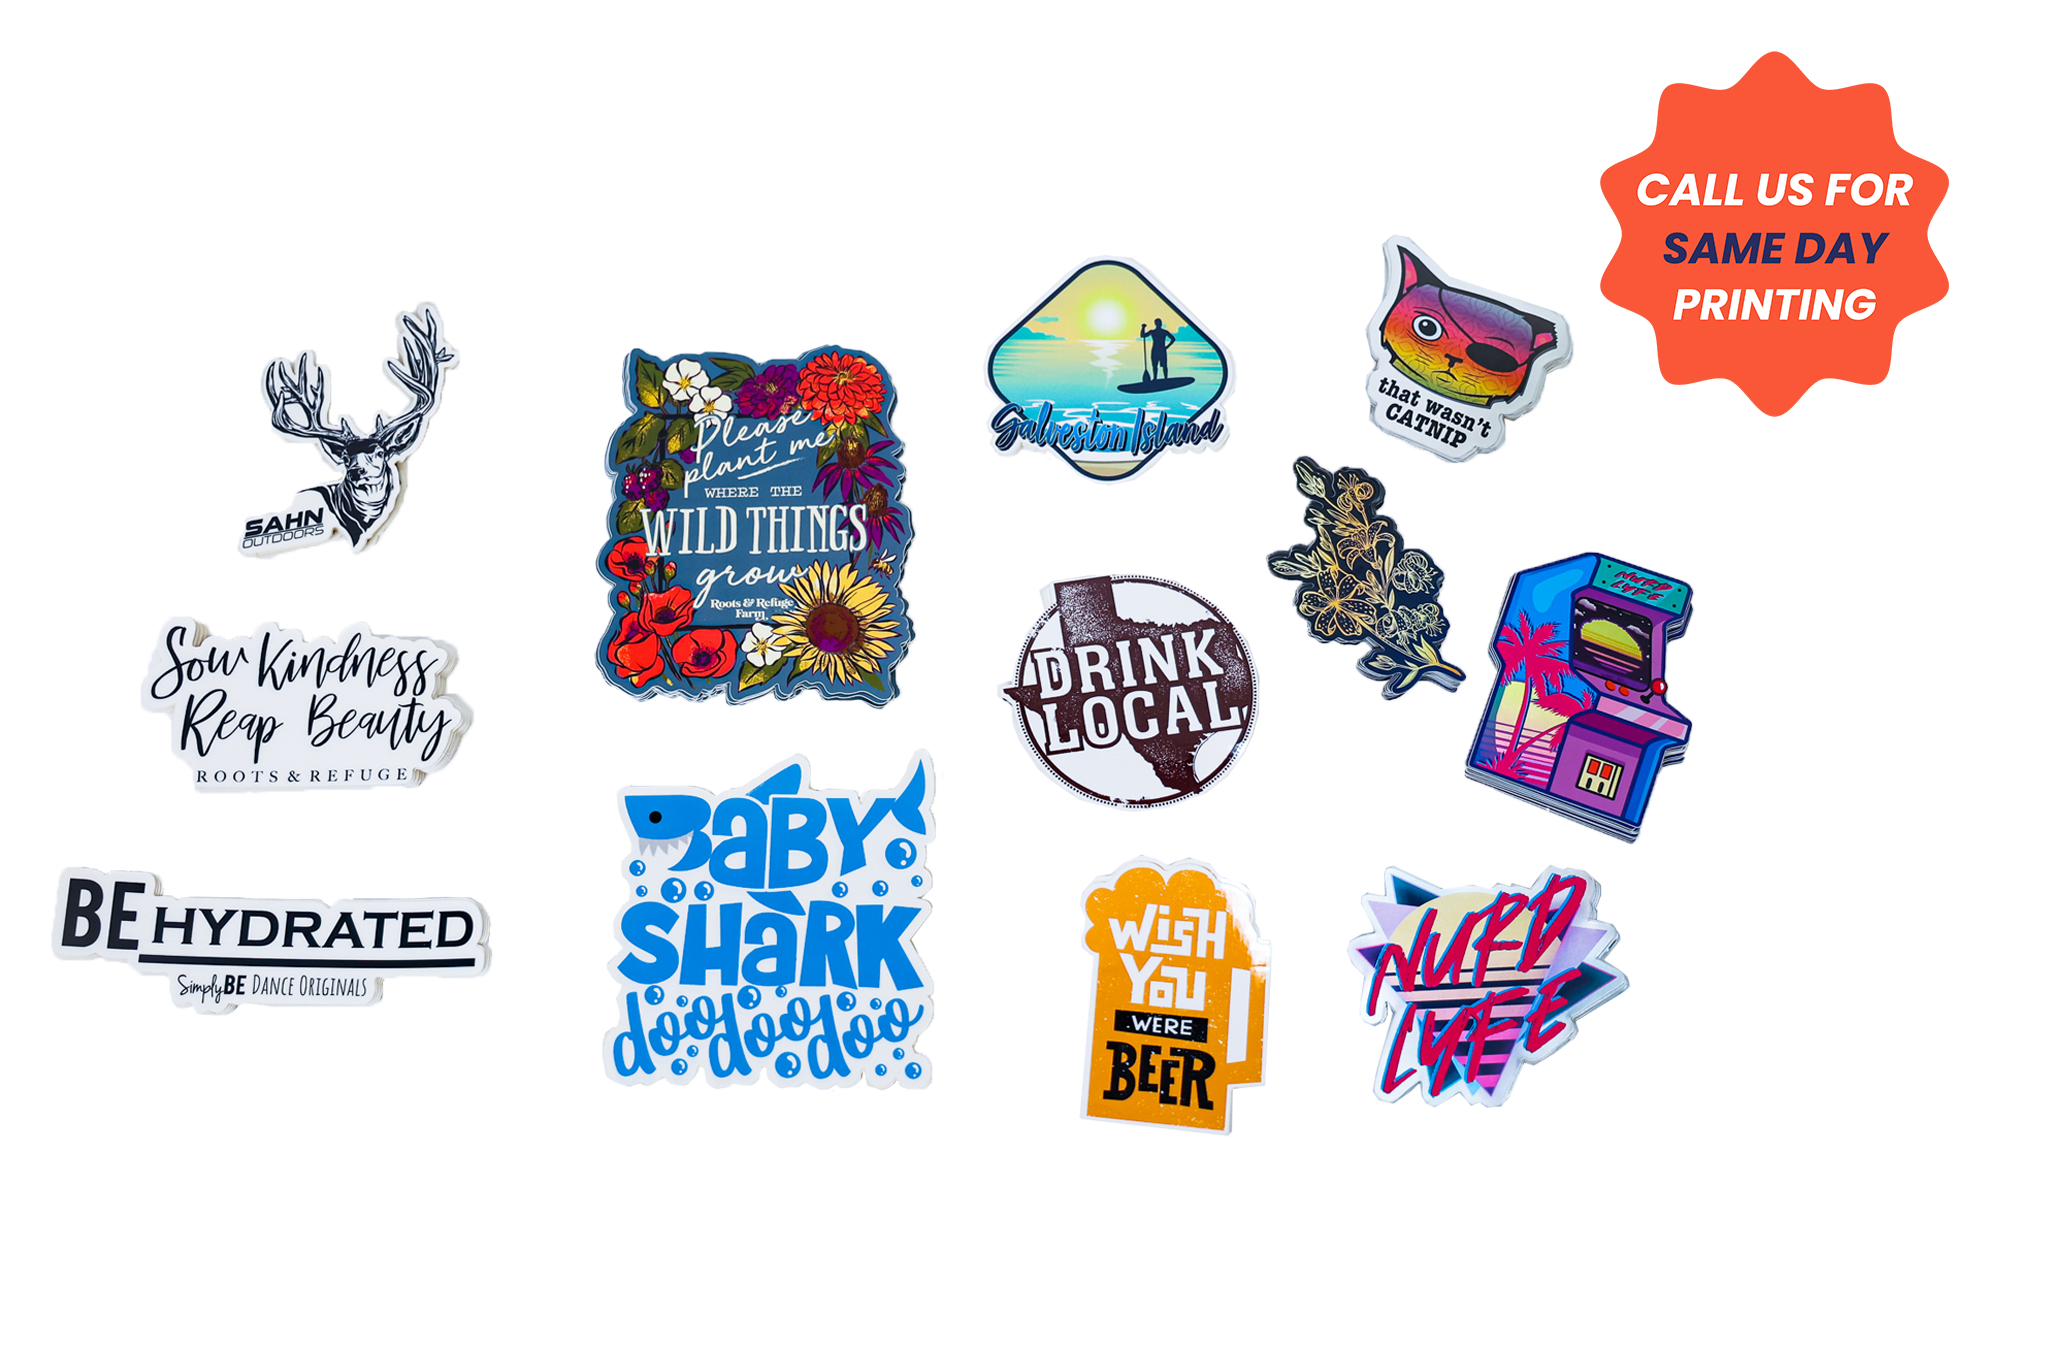 High-quality custom stickers and sticker printing by Sticker Mountain